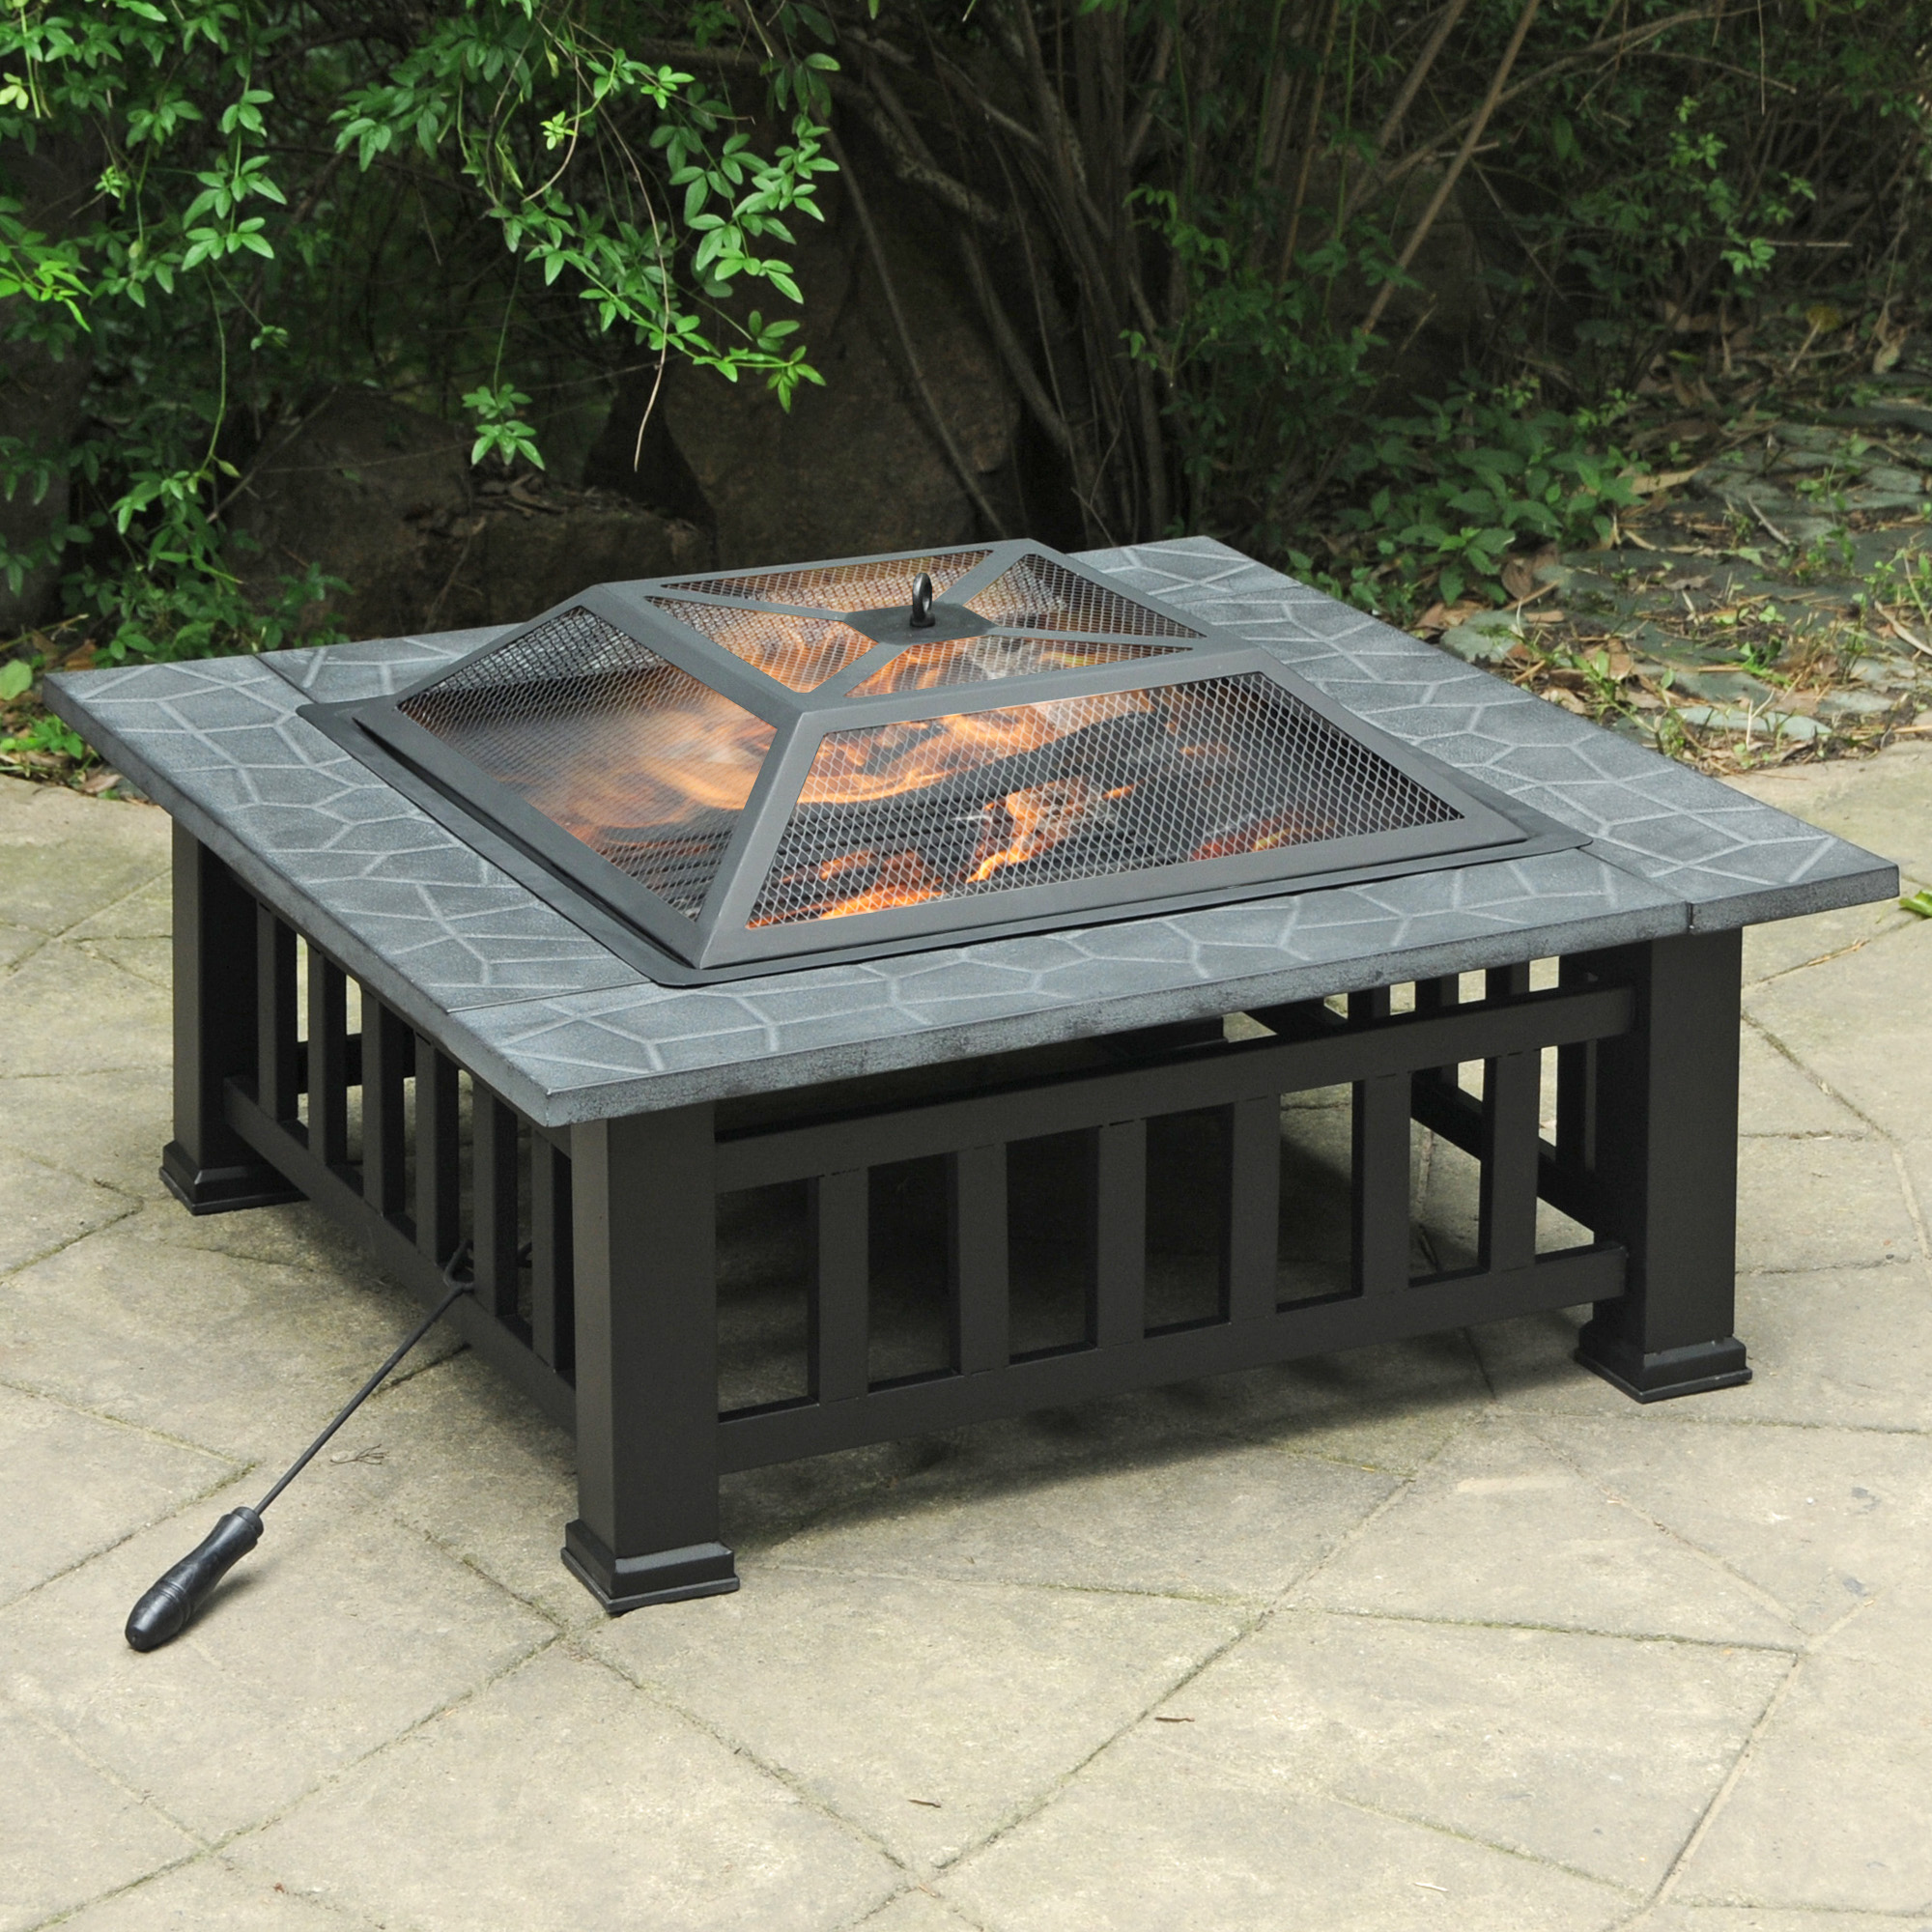 Axxonn 32" Alhambra Fire Pit with Safety Screen and Weatherproof Cover wood burning Fire Bowl - image 1 of 5